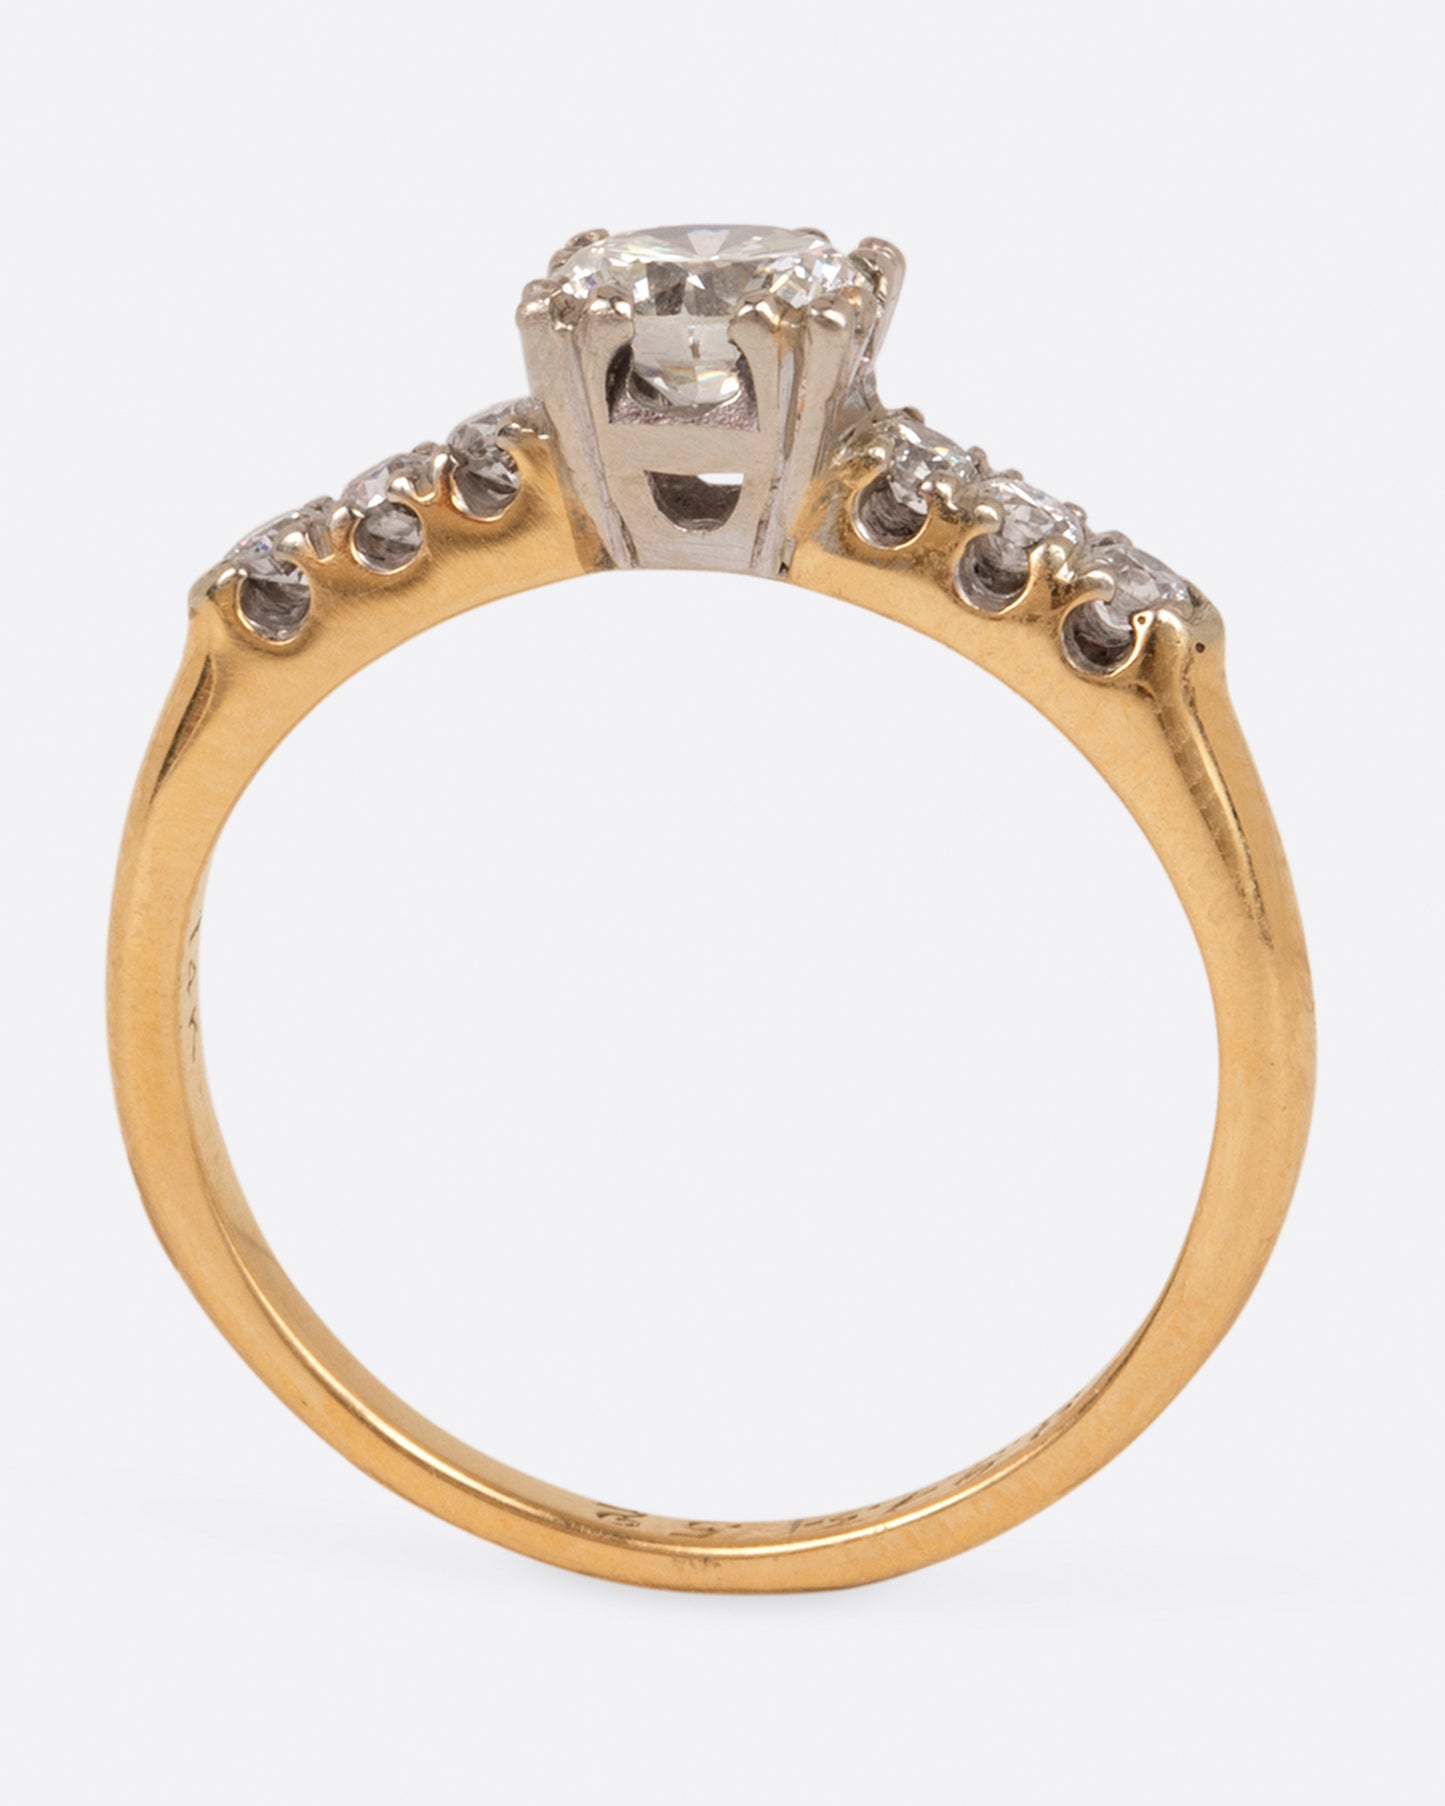 A yellow gold ring with a round center diamond and three smaller round diamonds on either side set in white gold prongs, shown standing.